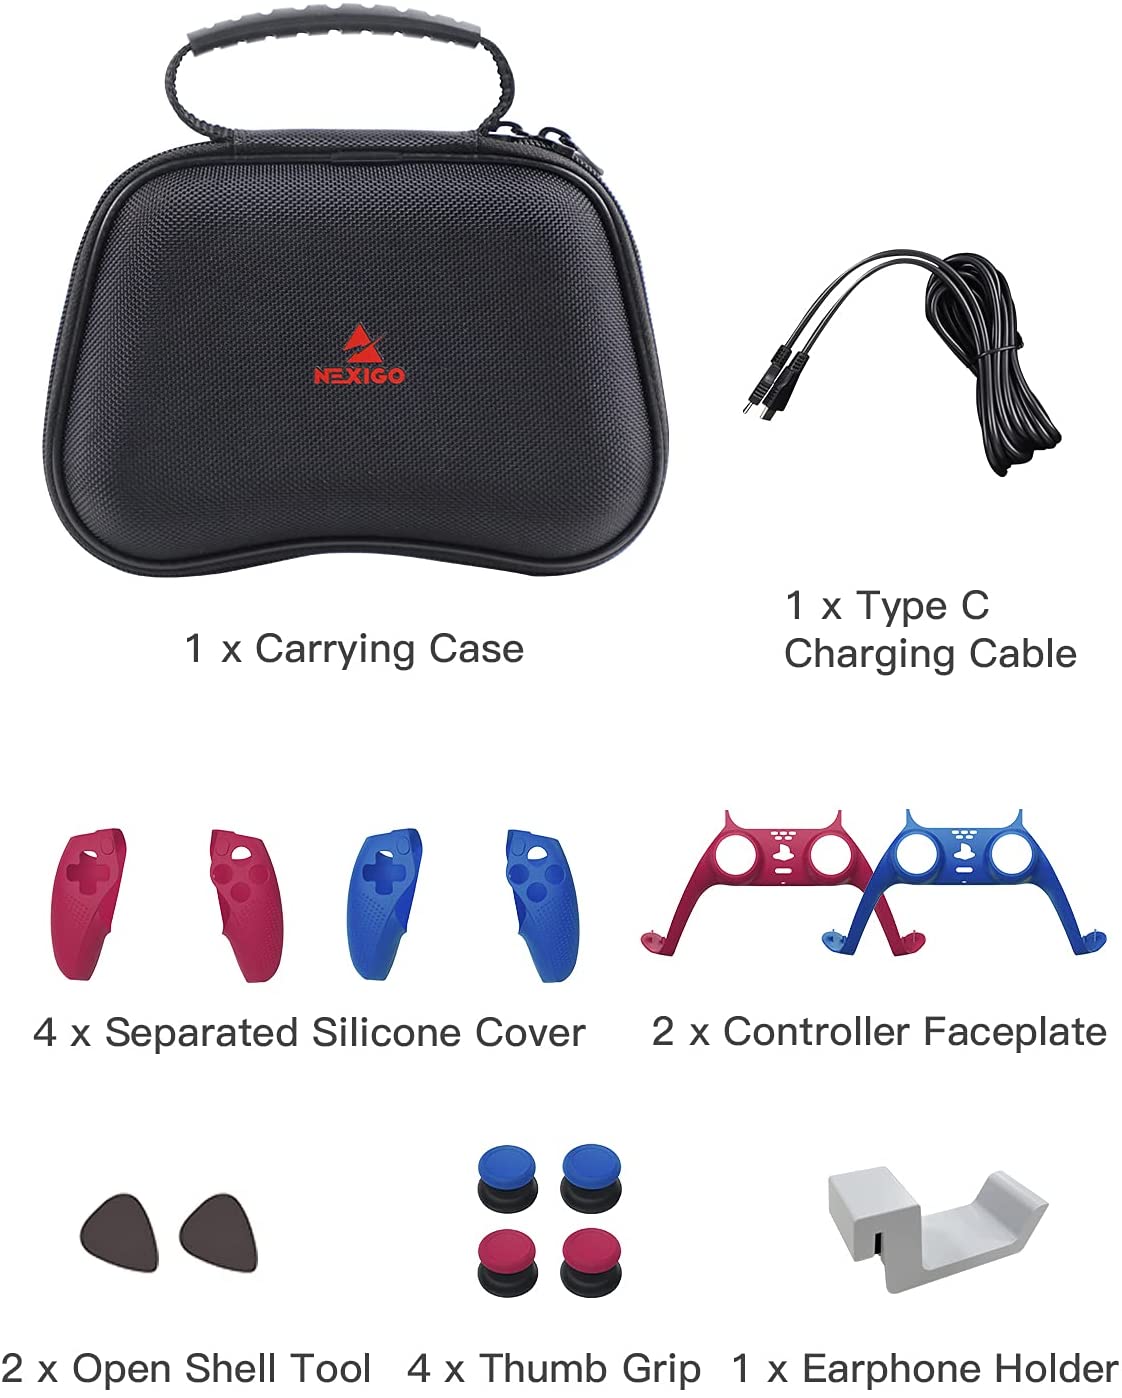 Showcasing accessories included in the PS5 Accessory Kit.